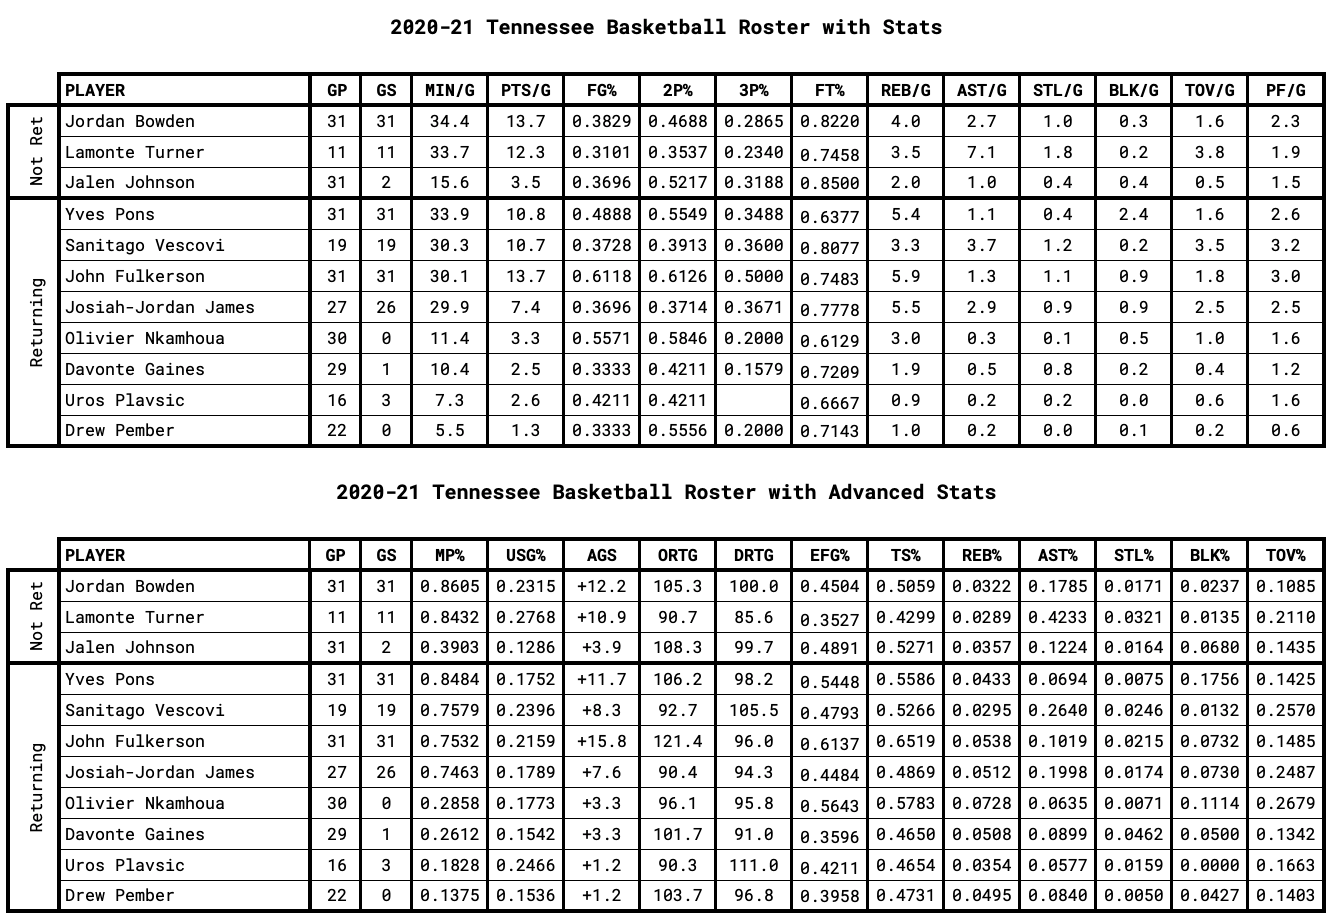 Tennessee Player Stats for Returning and Non-Returning Players